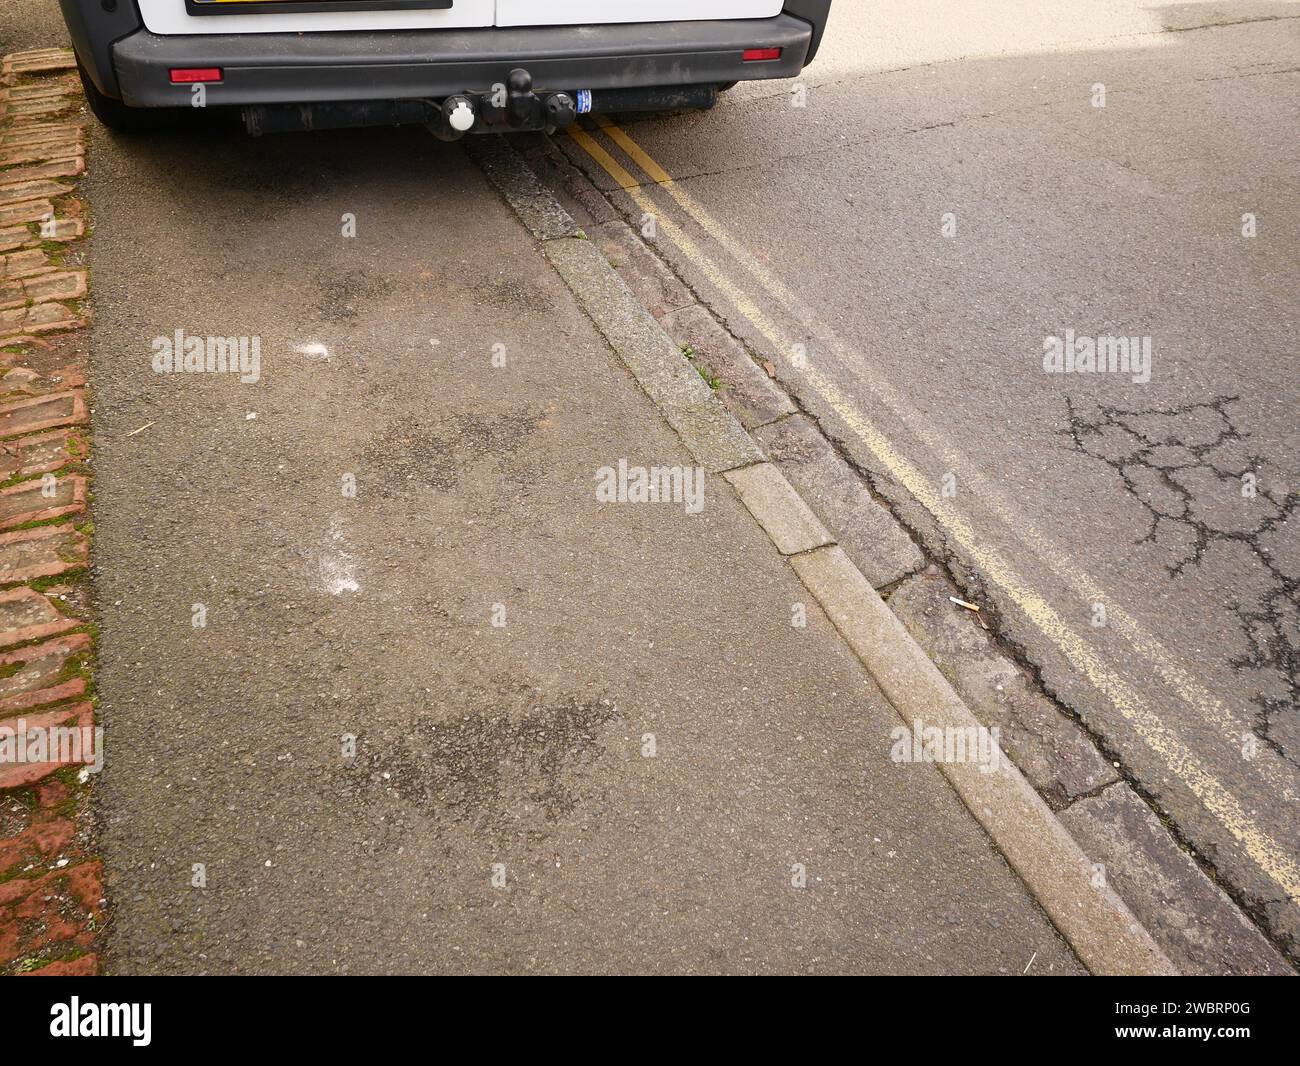 Vehicle parked over pavement causing an obstruction and blocking pedestrian access. Stock Photo